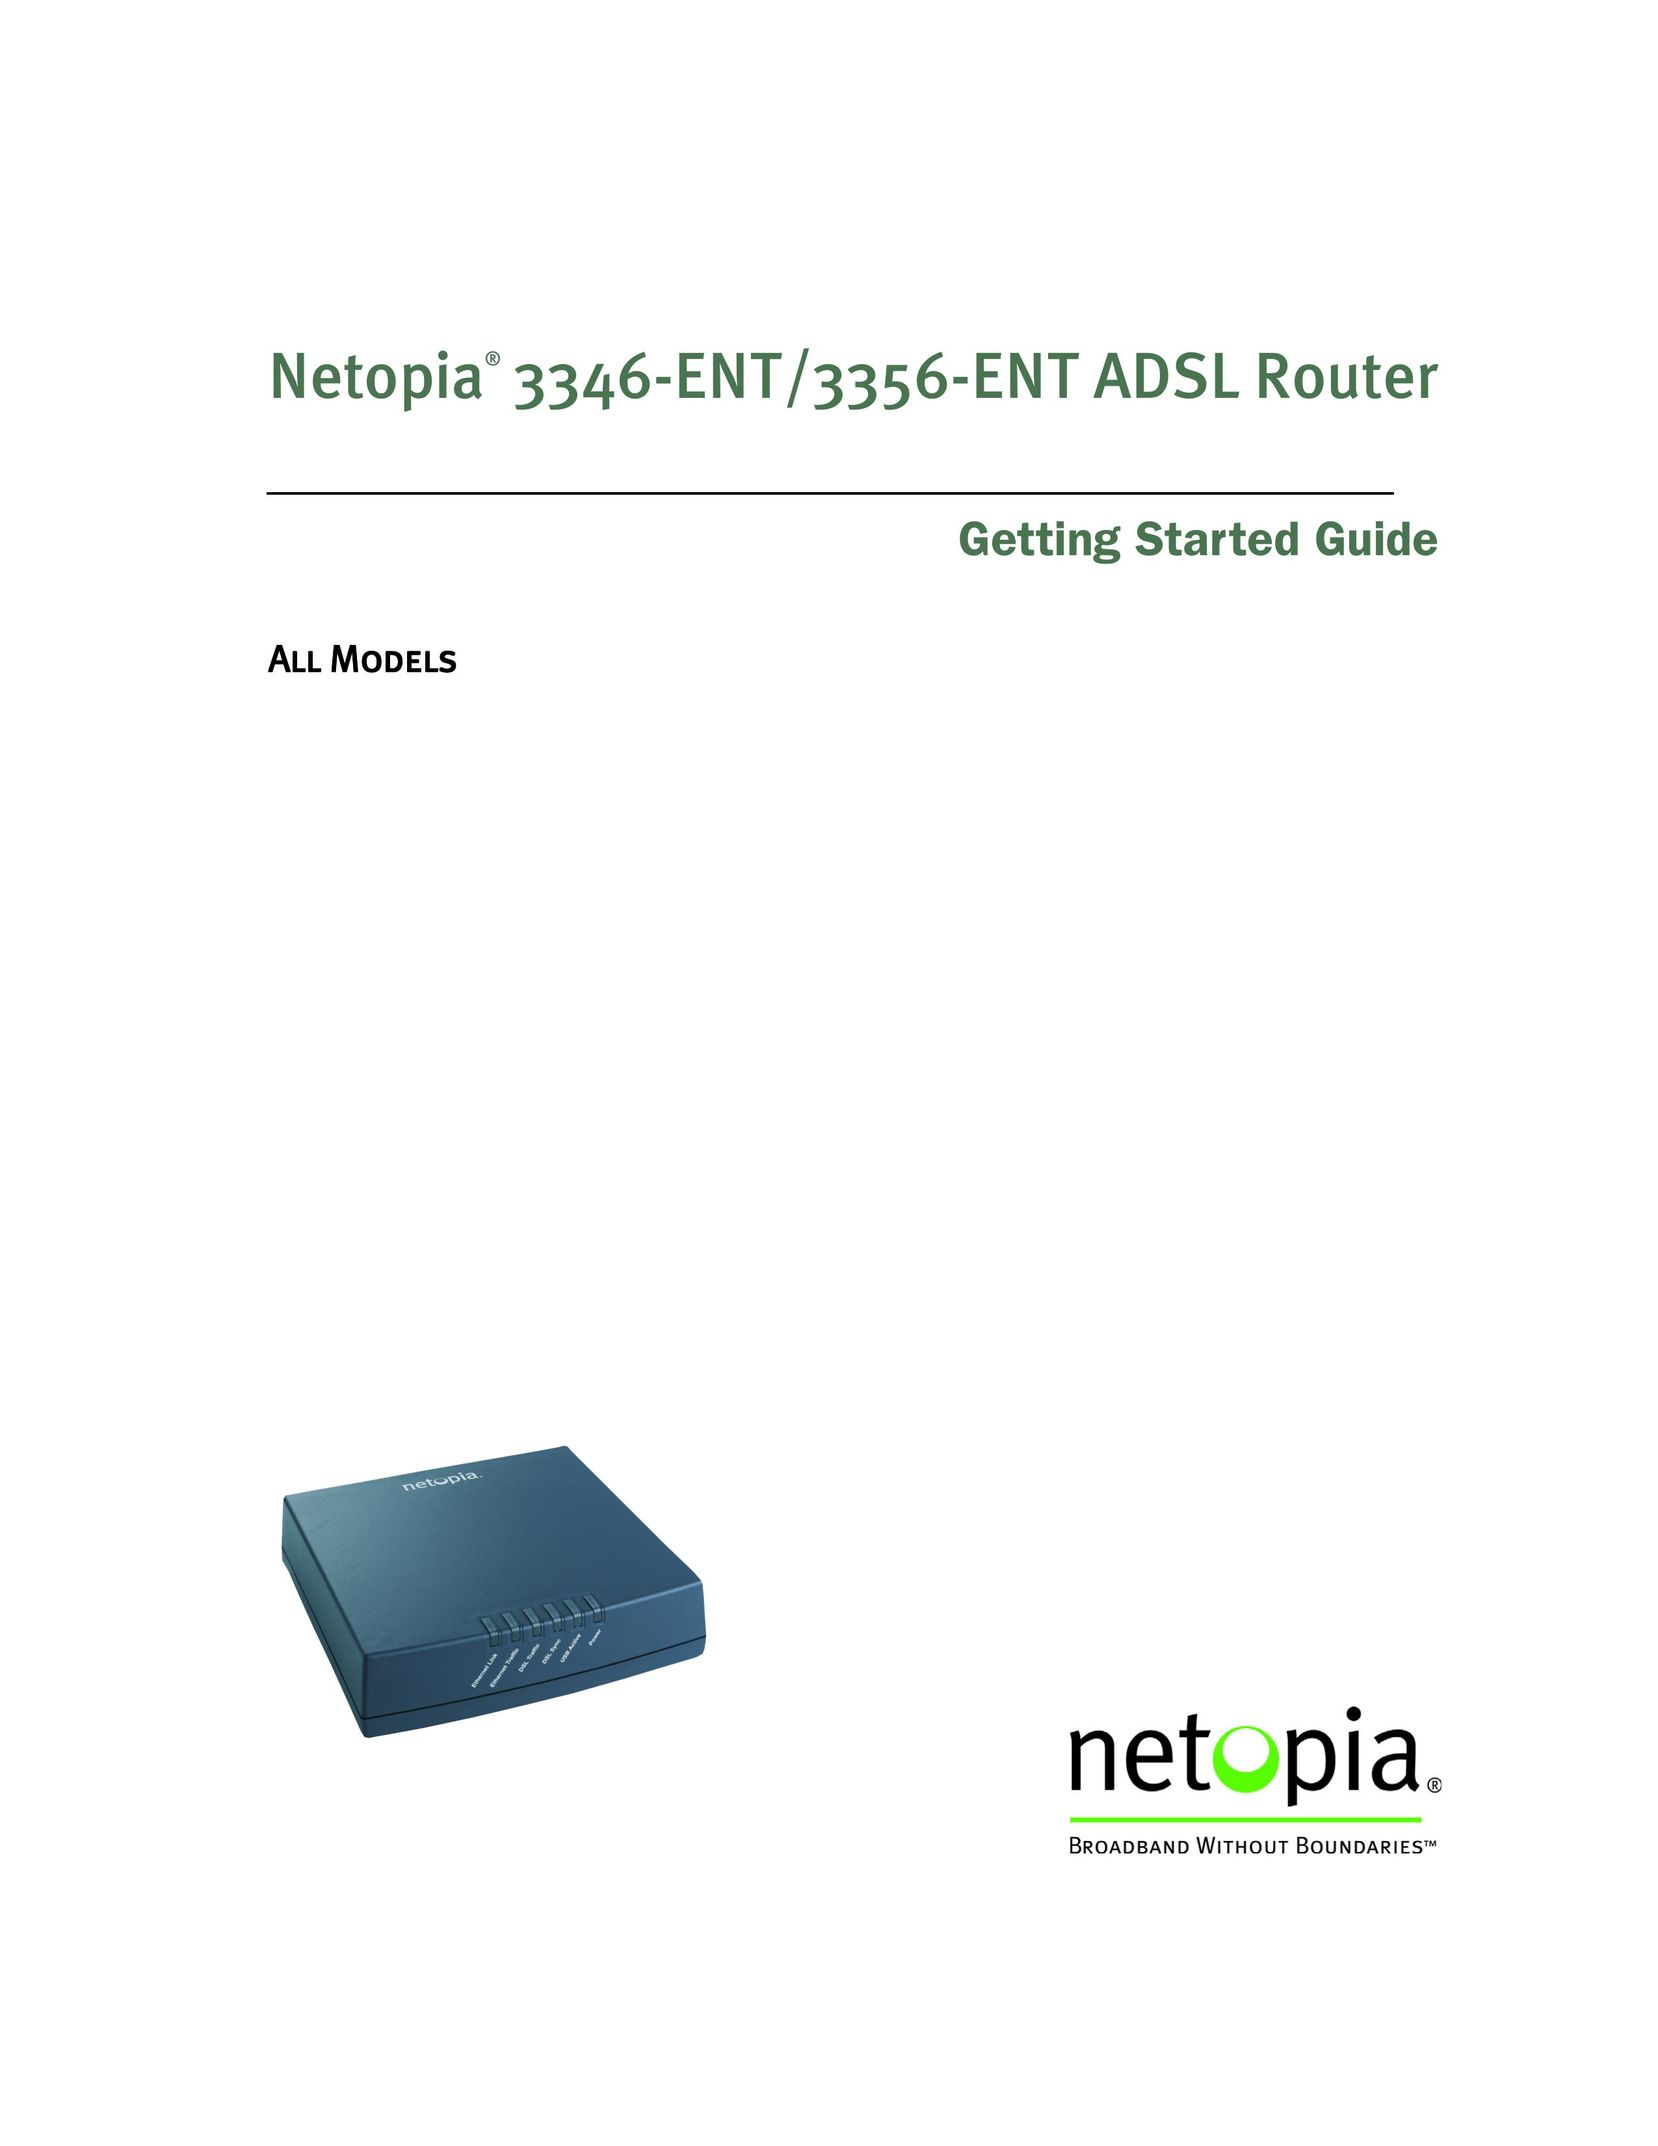 Netopia 3356-ENT Network Router User Manual